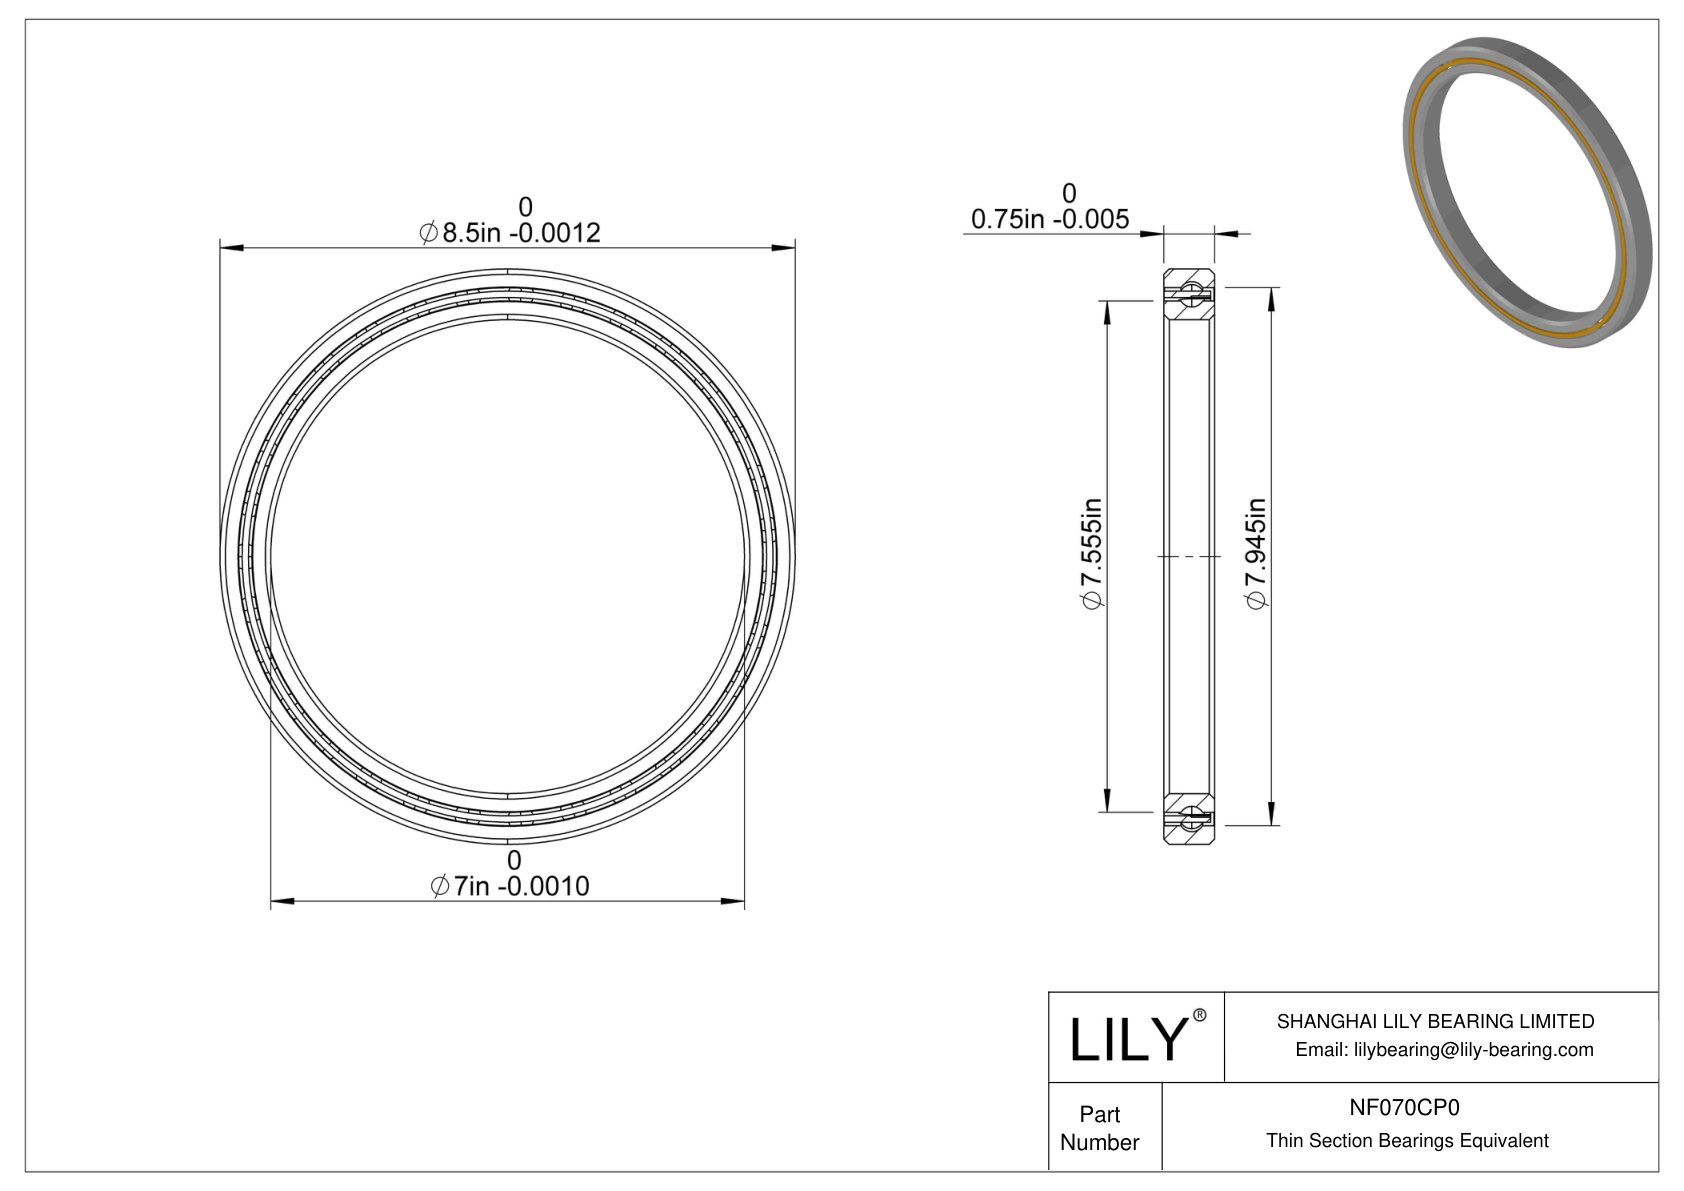 NF070CP0 Constant Section (CS) Bearings cad drawing